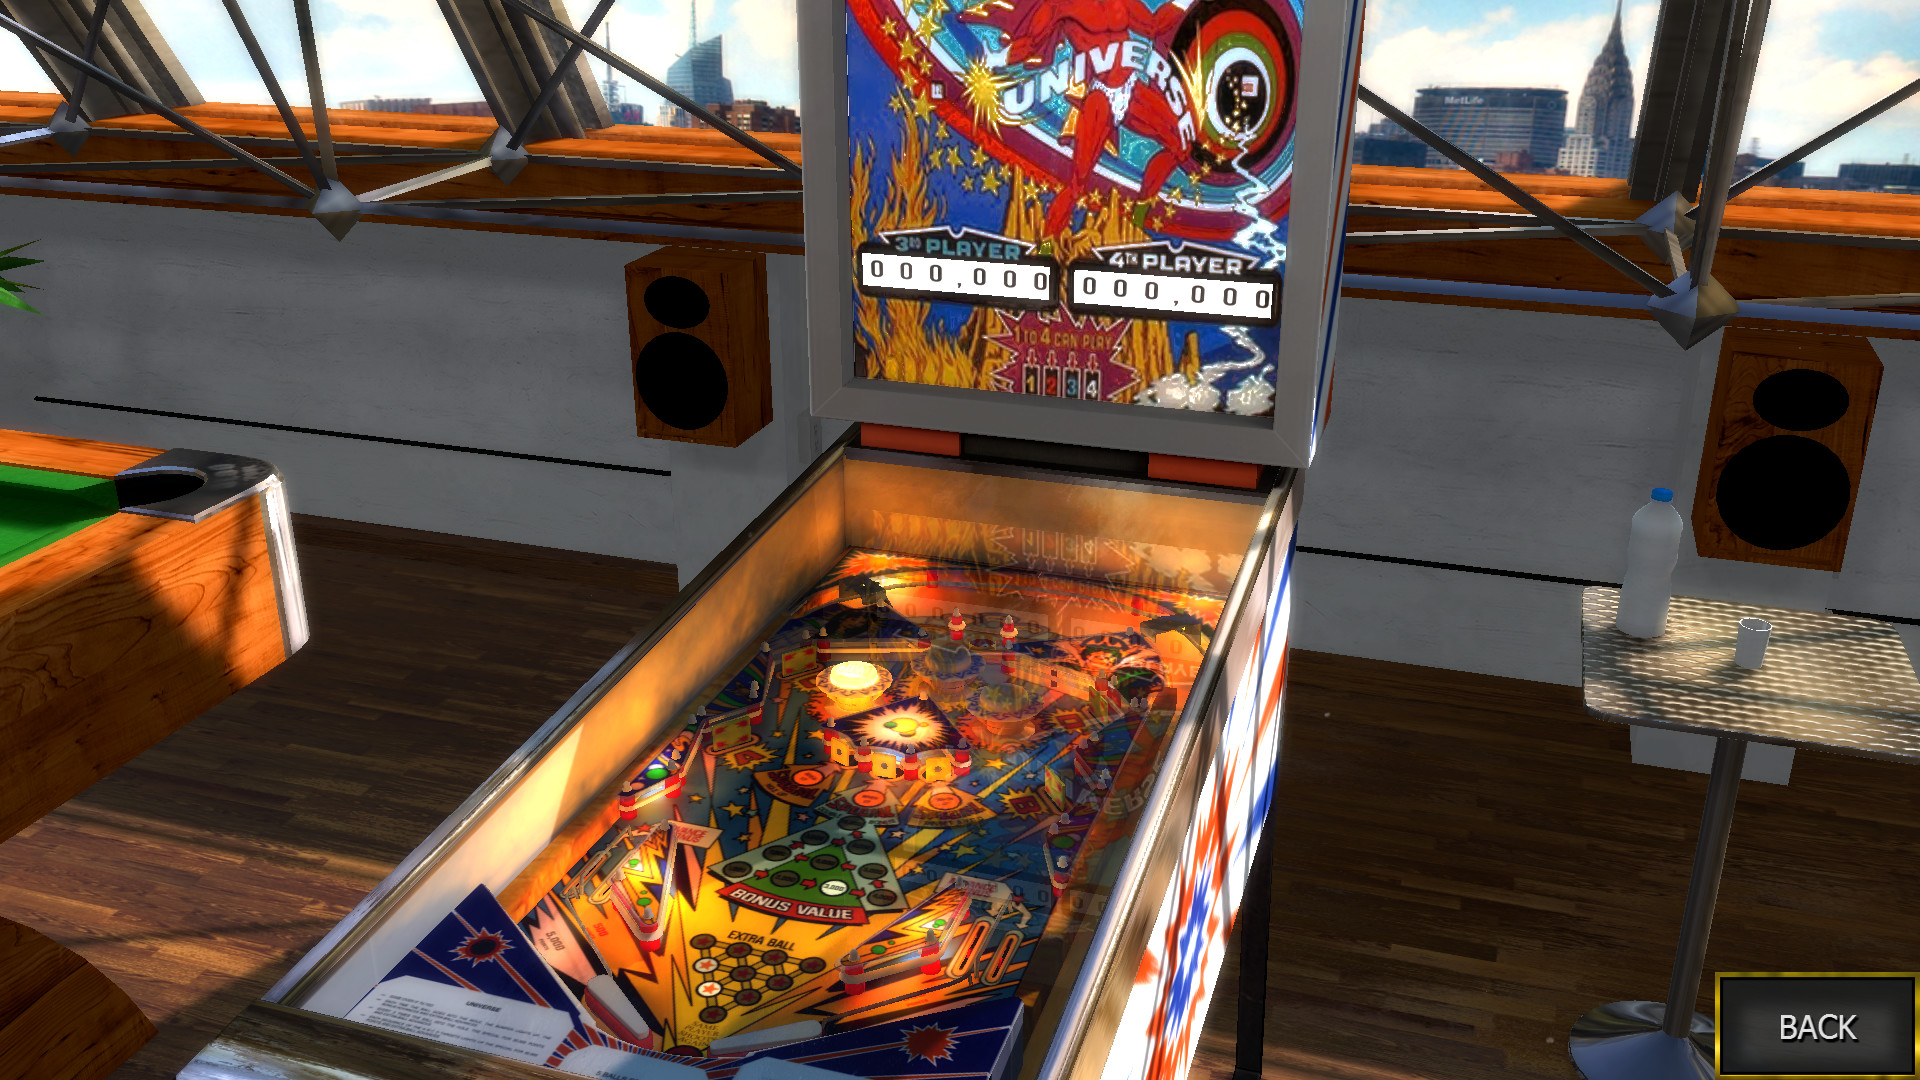 zaccaria pinball deluxe tables